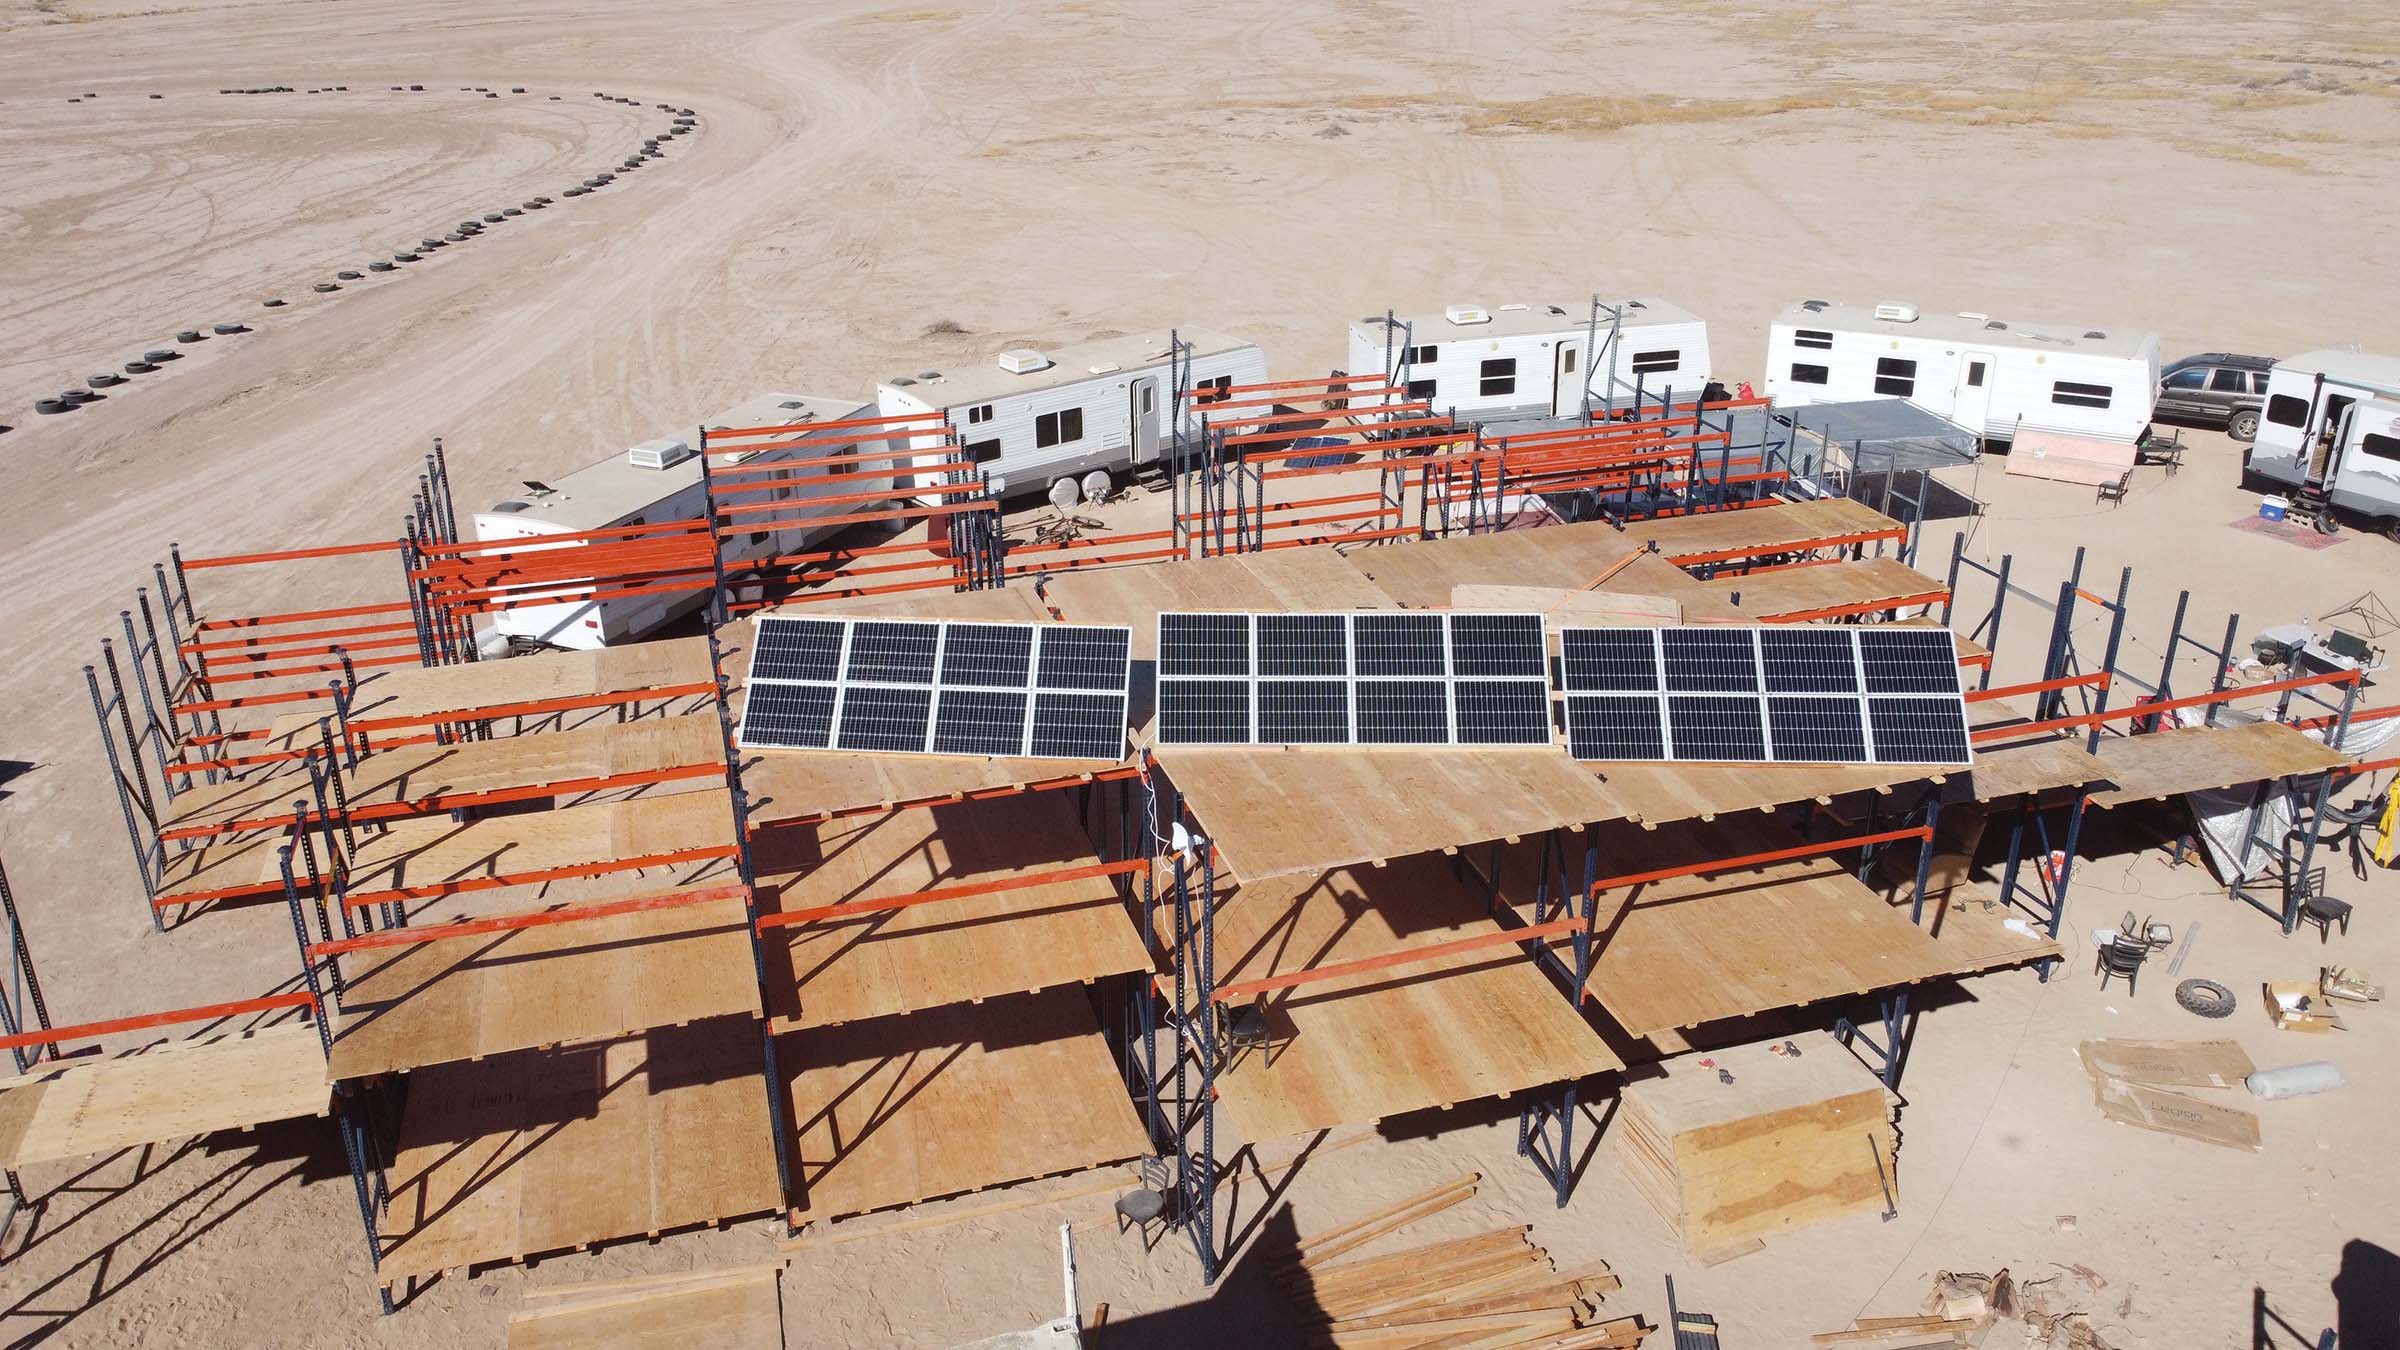 Three large solar panels arranged on top of a large pallet-rack structure in the desert